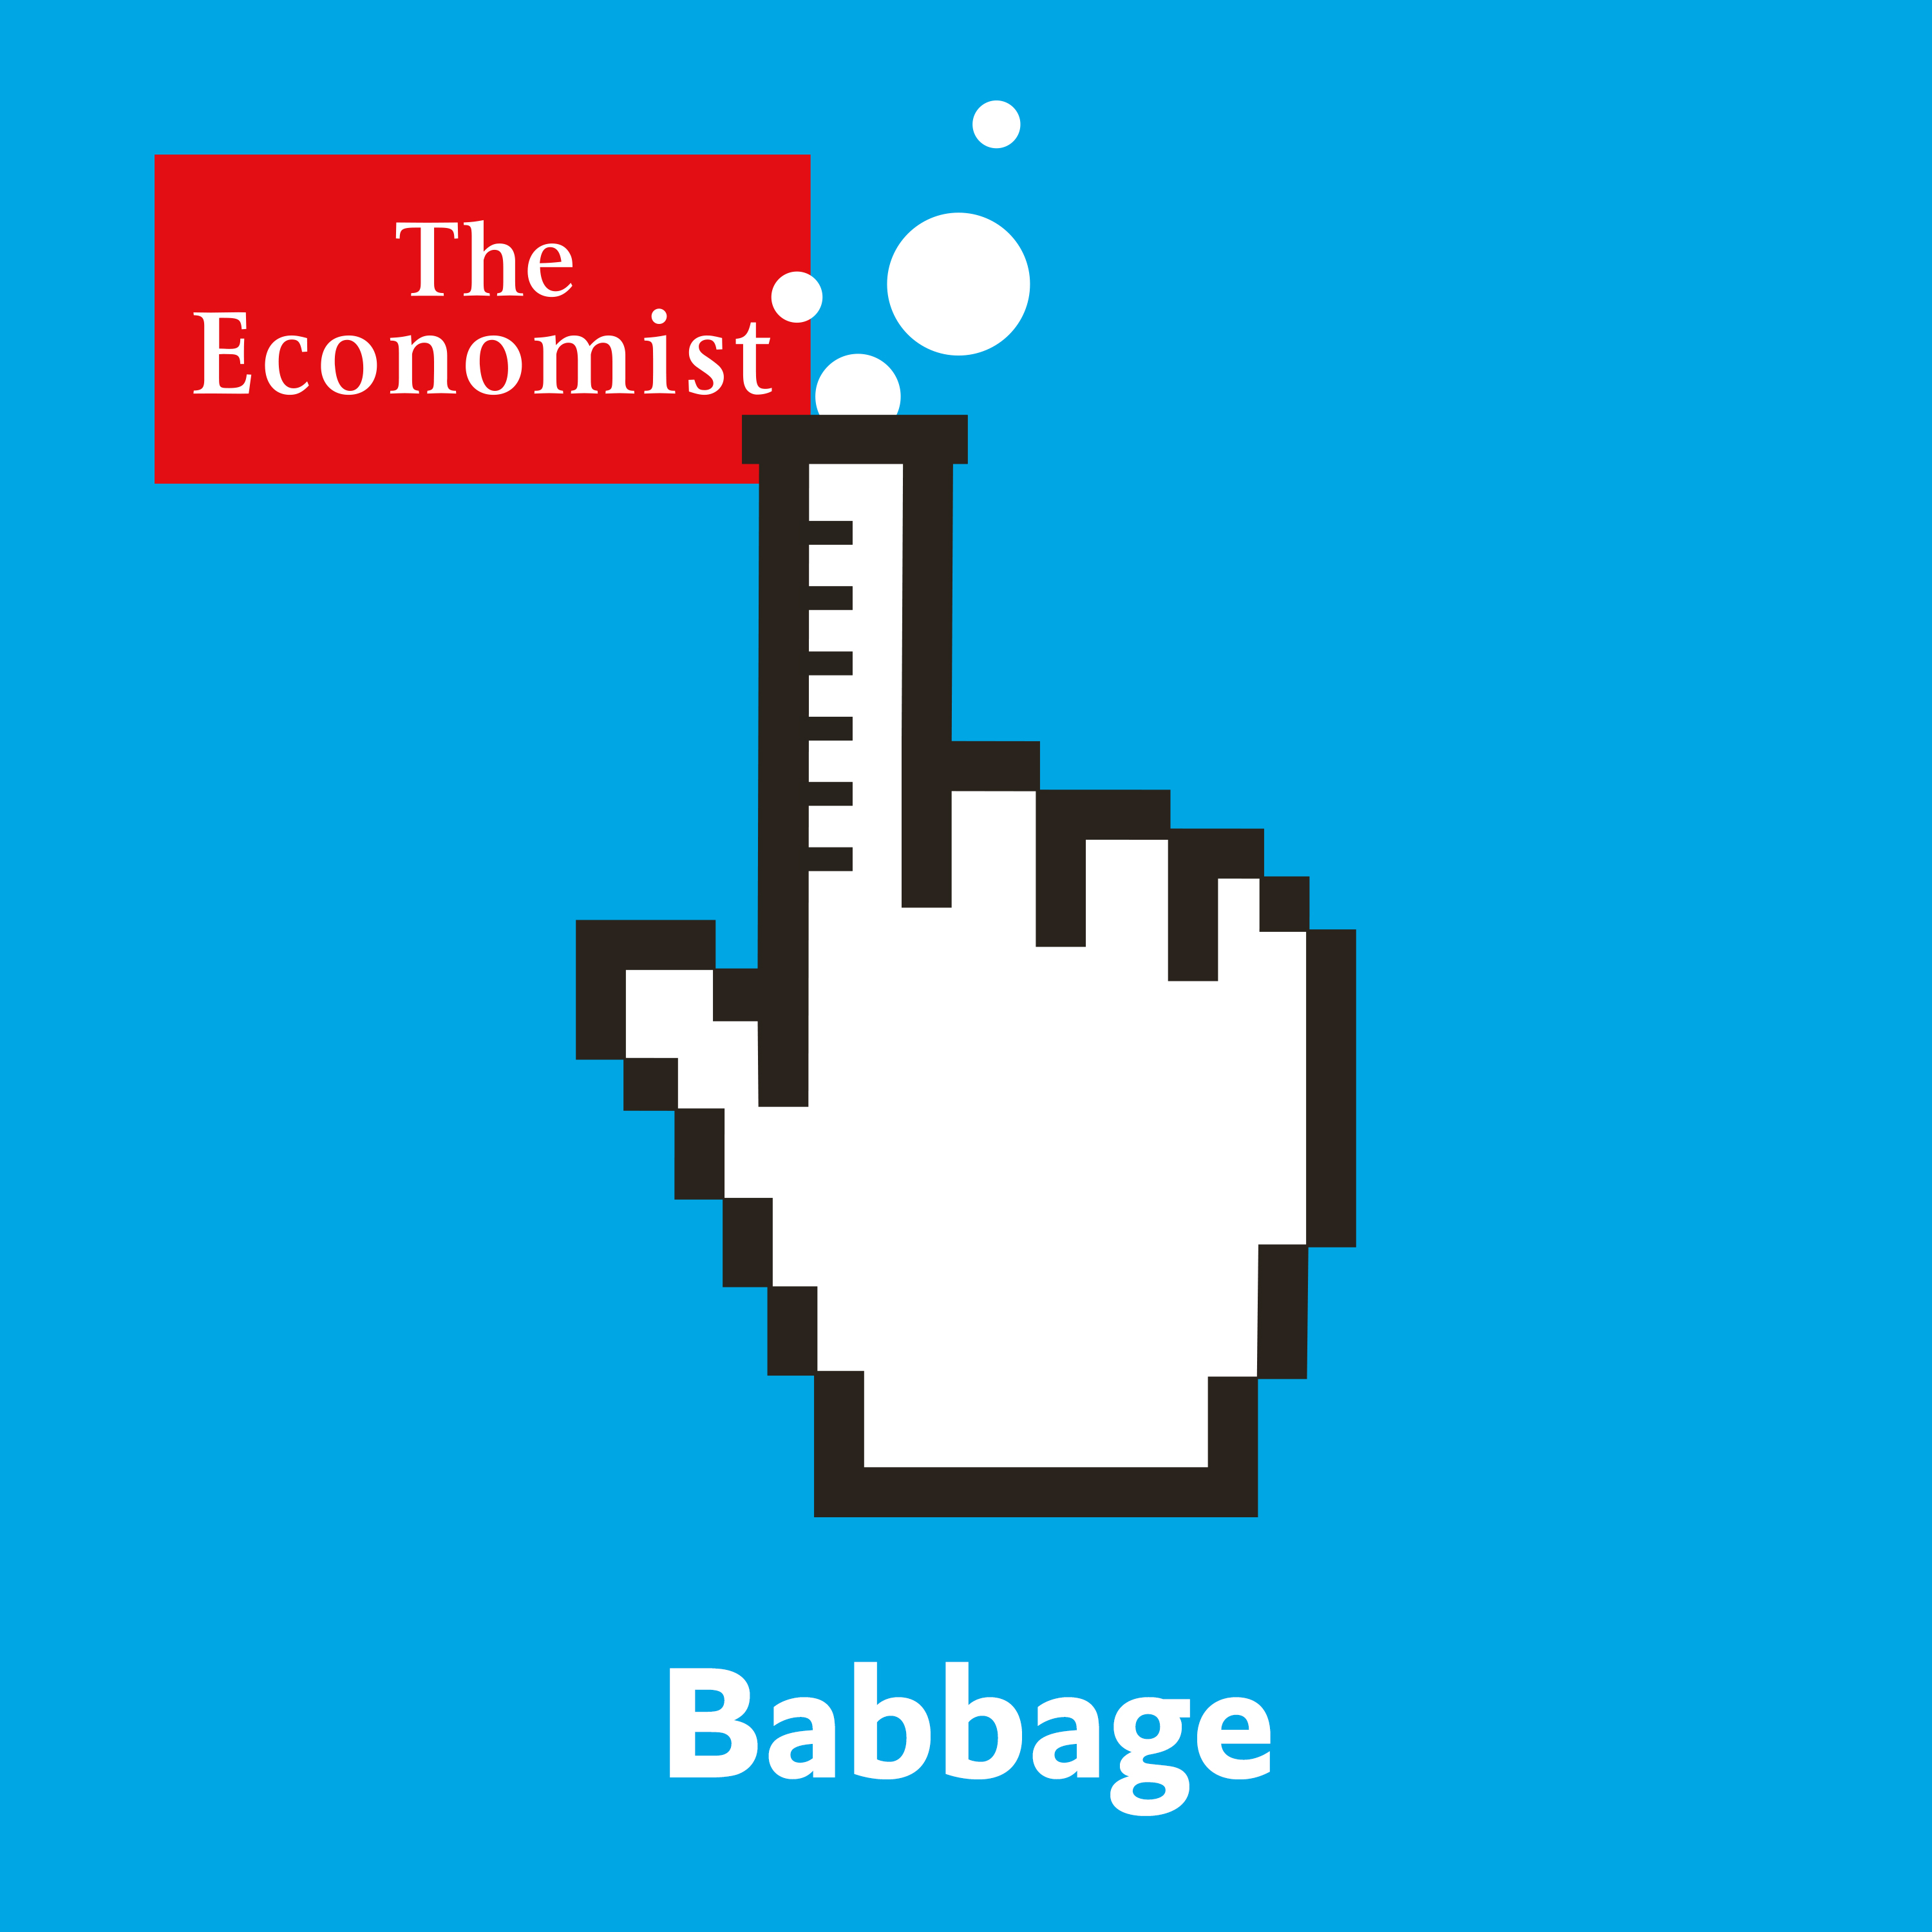 Babbage: Could artificial intelligence become sentient?